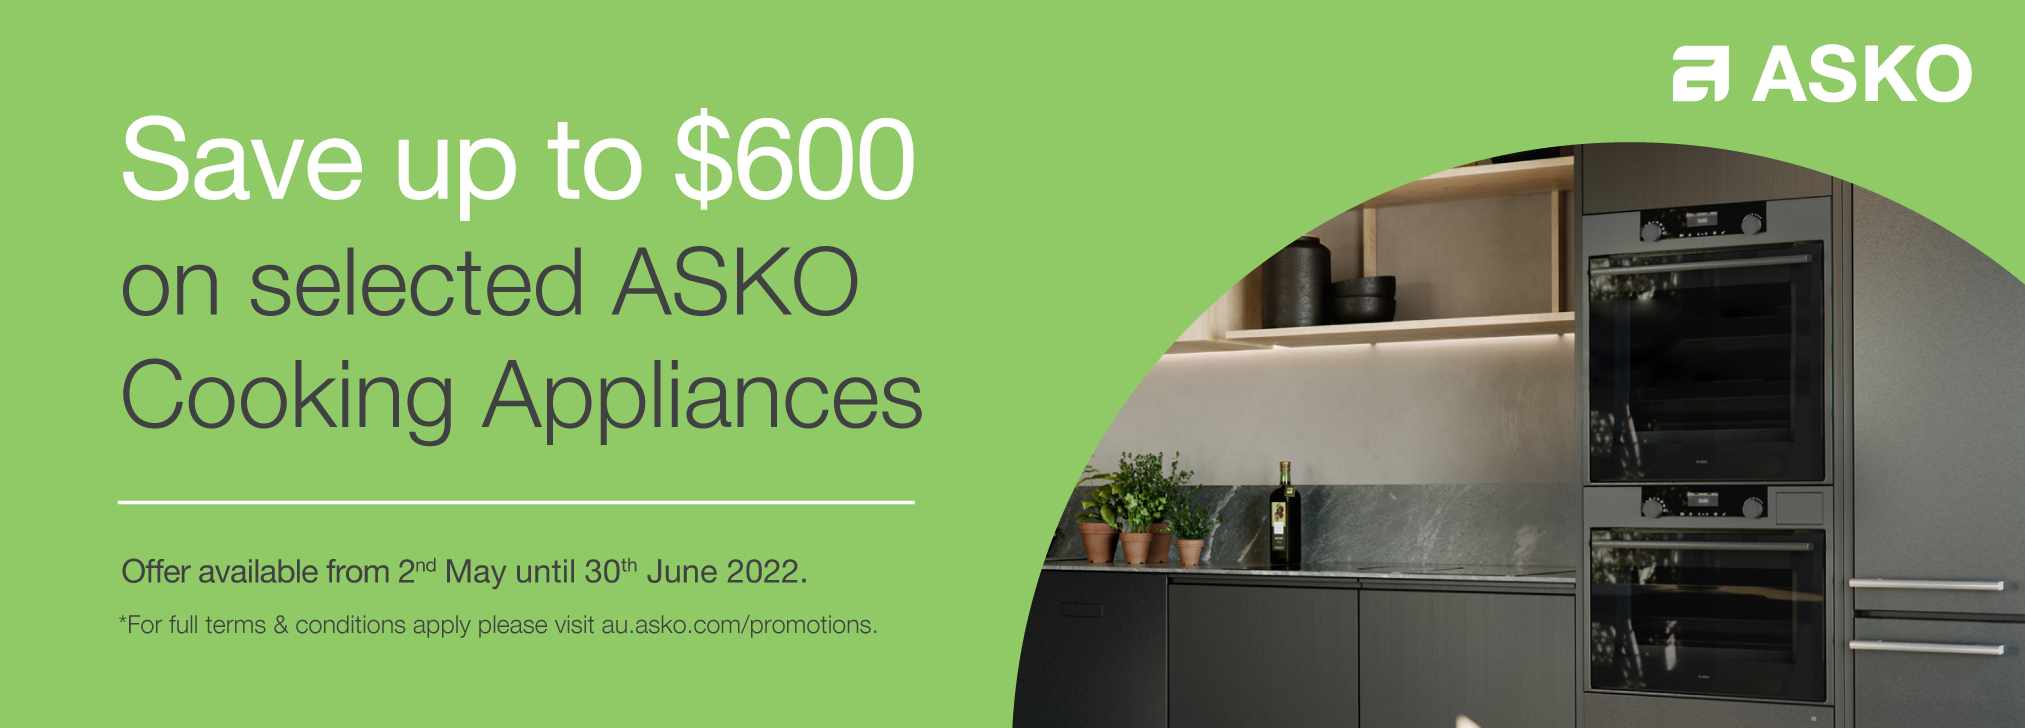 Save up to $600 on selected Asko Cooking Appliances